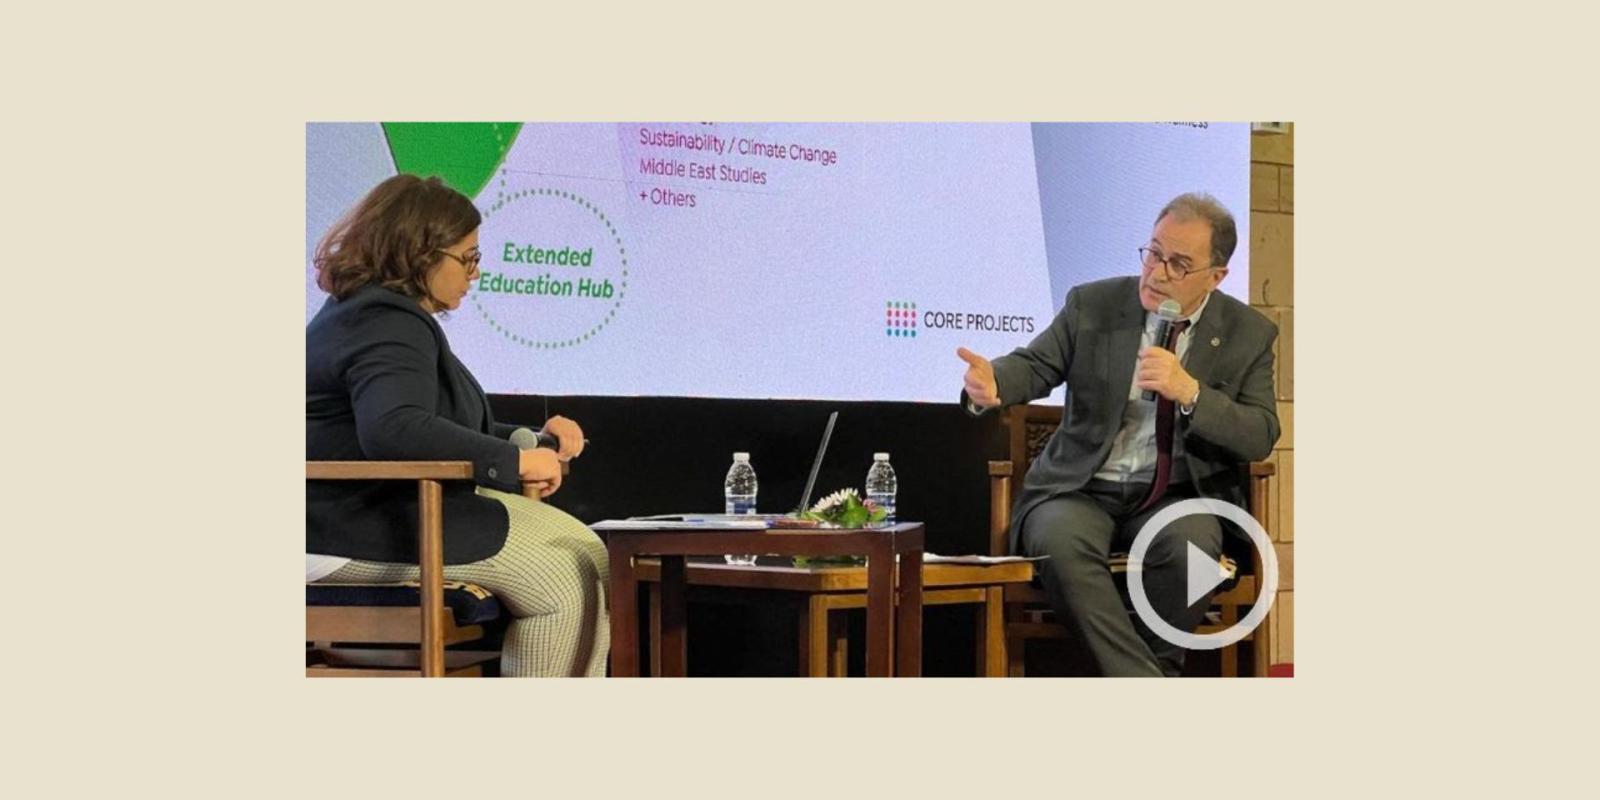 President Ahmad Dallal sits on a stage with moderator Amina Elbendary. He holds a microphone and gestures with his right hand, with a screen behind him showing an infographic explaining AUC's strategic priorities.